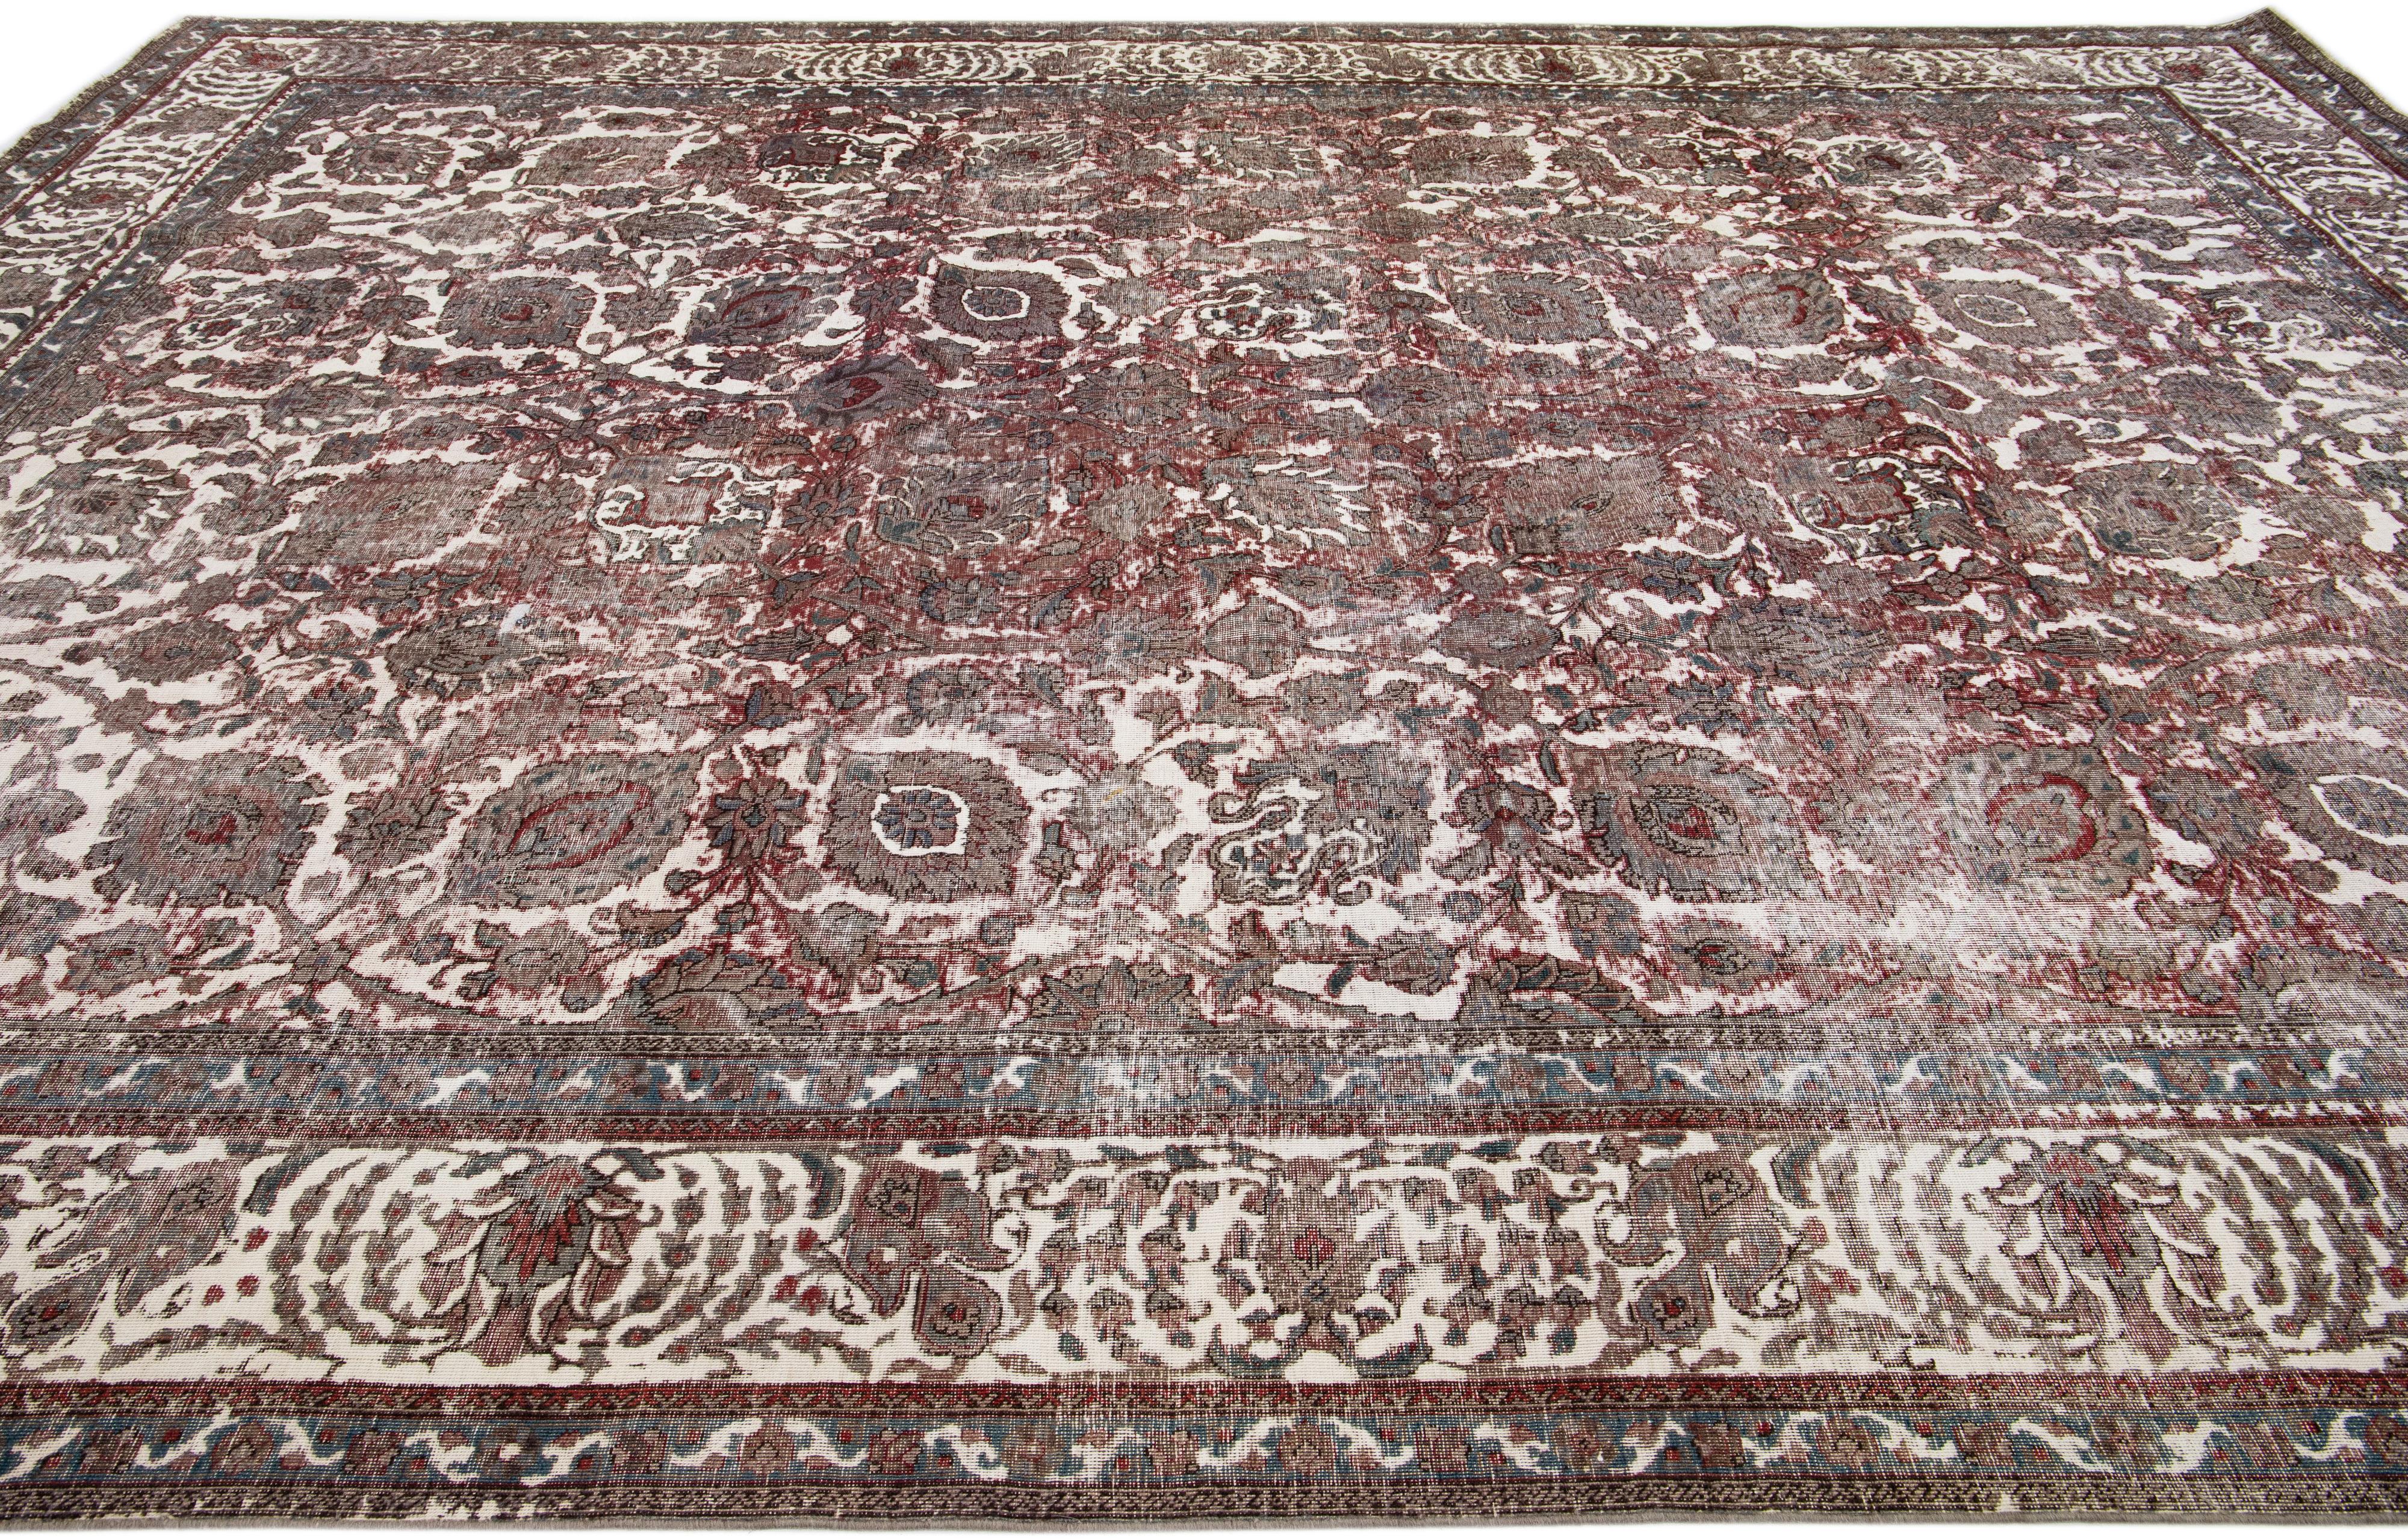 Vintage Handmade Distressed Persian Wool Rug In Red In Distressed Condition For Sale In Norwalk, CT